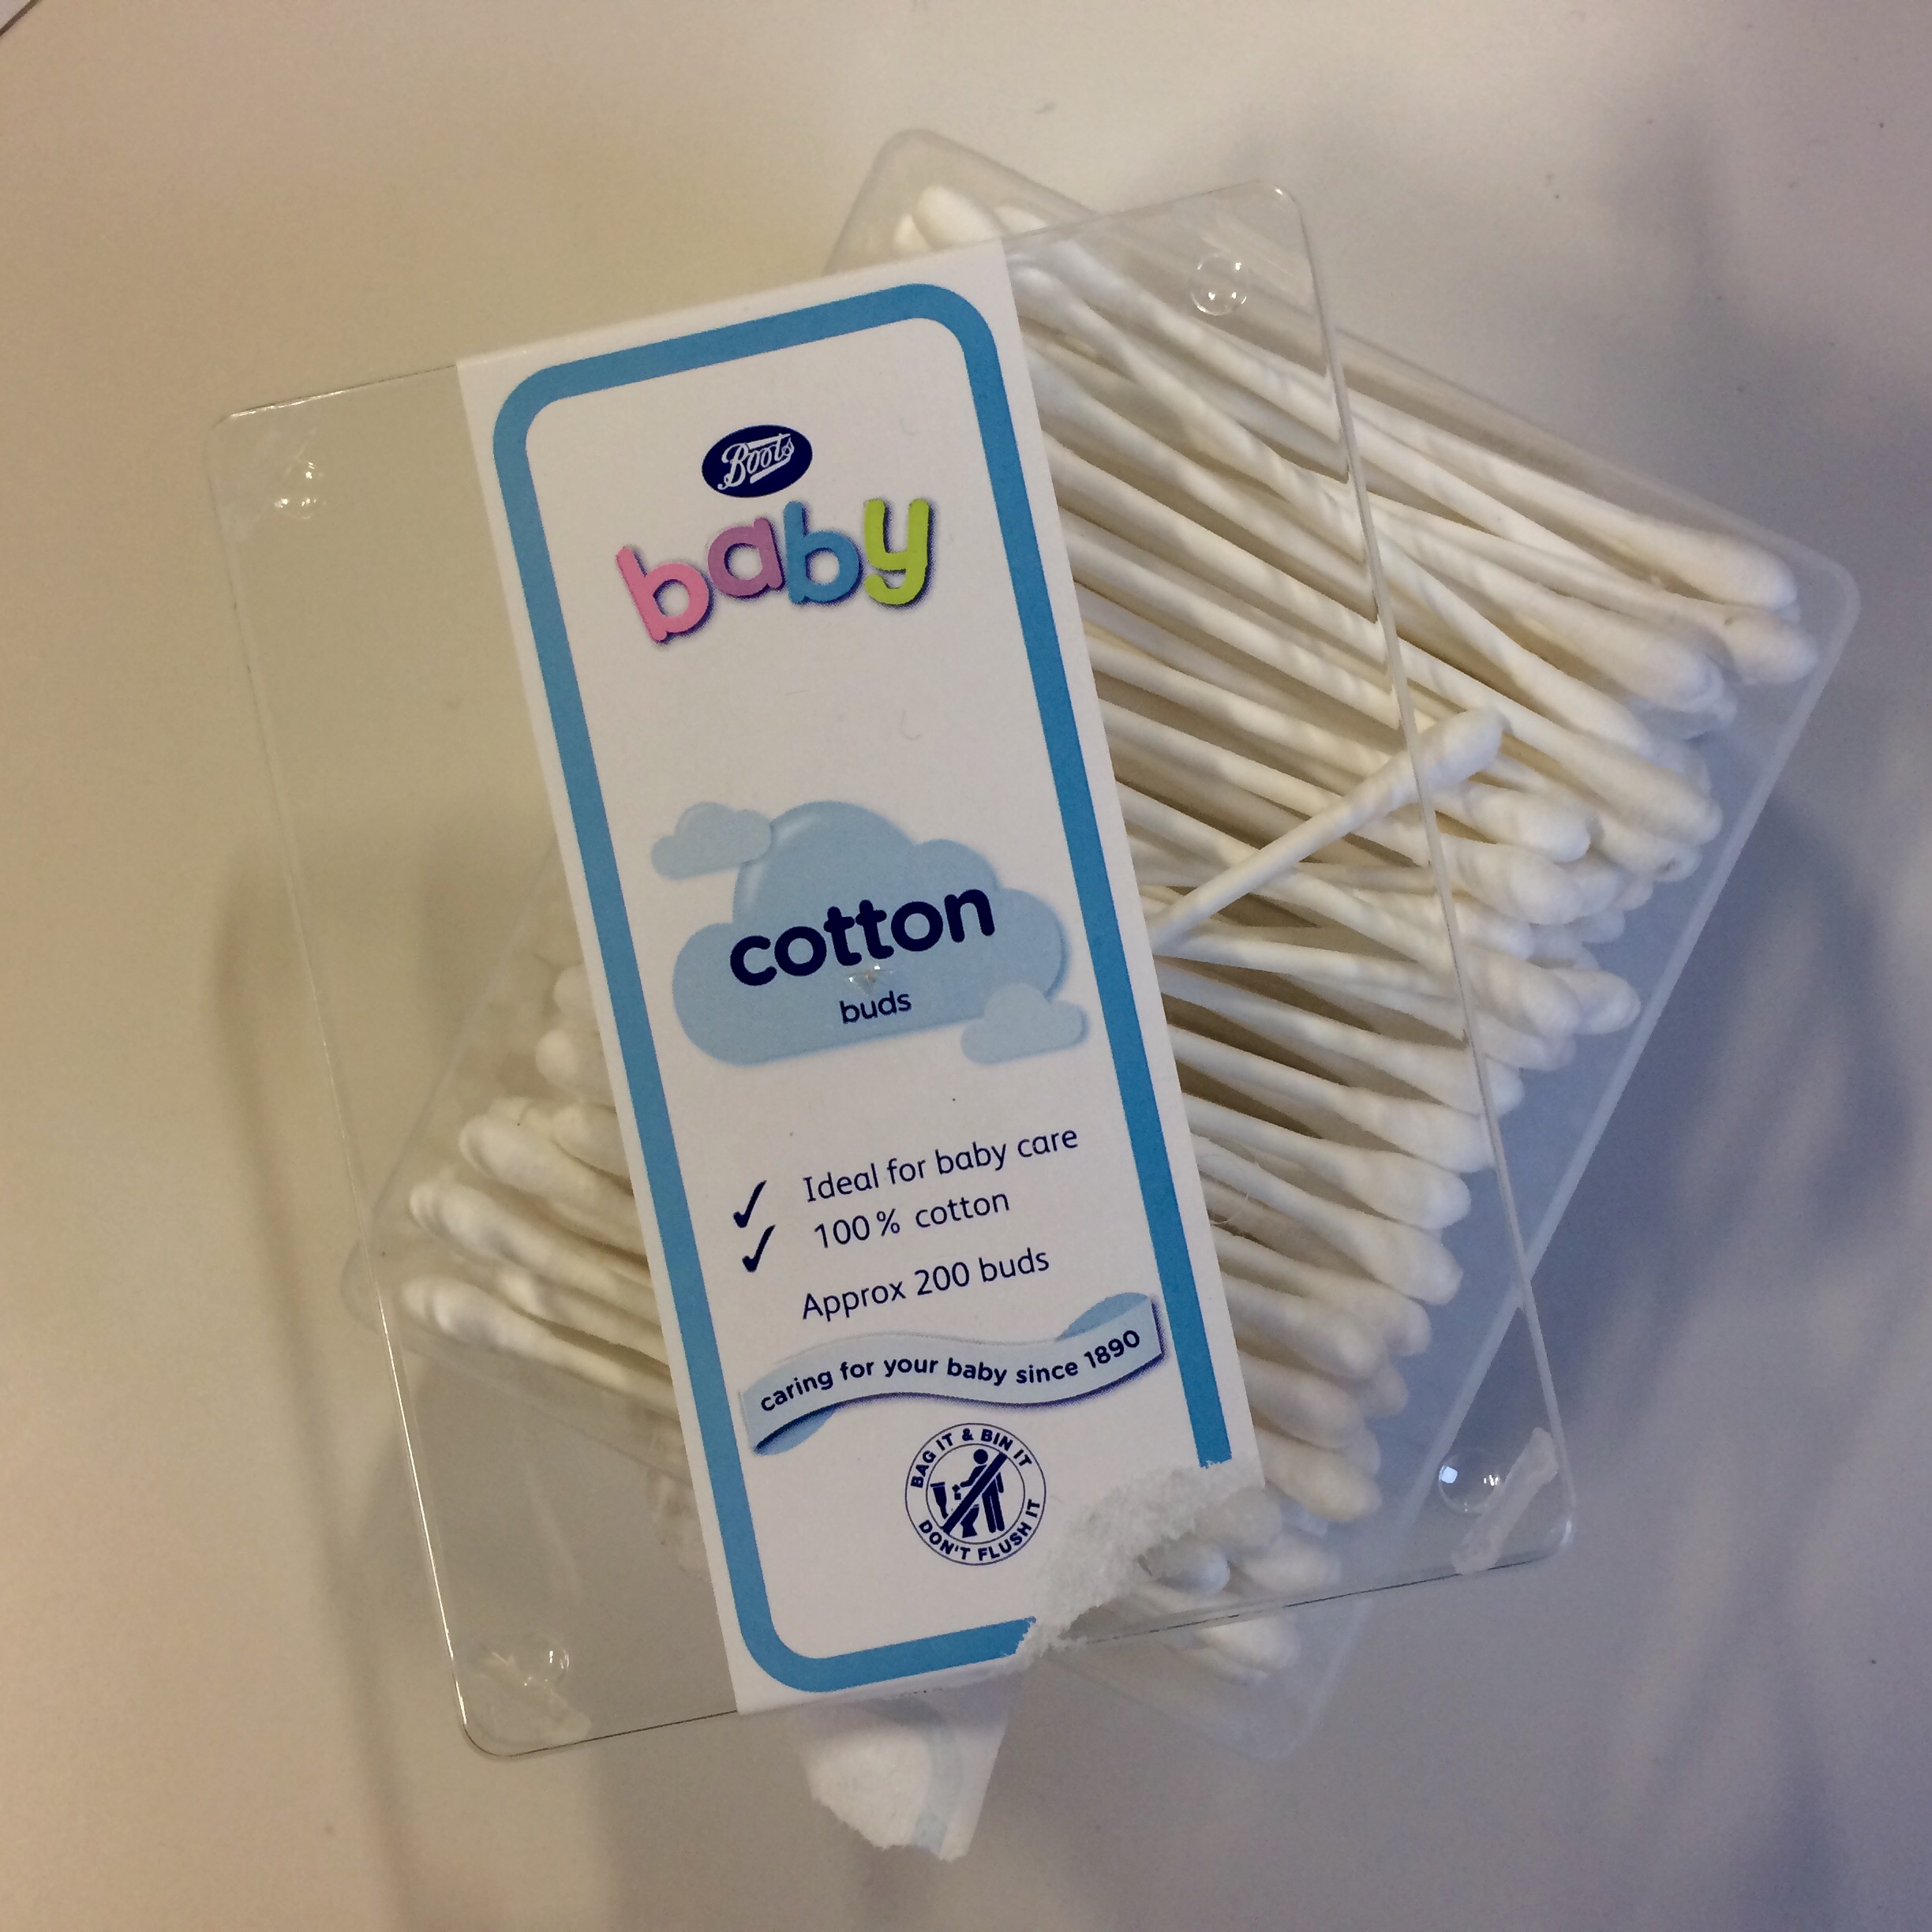 Paper cotton buds from Boots